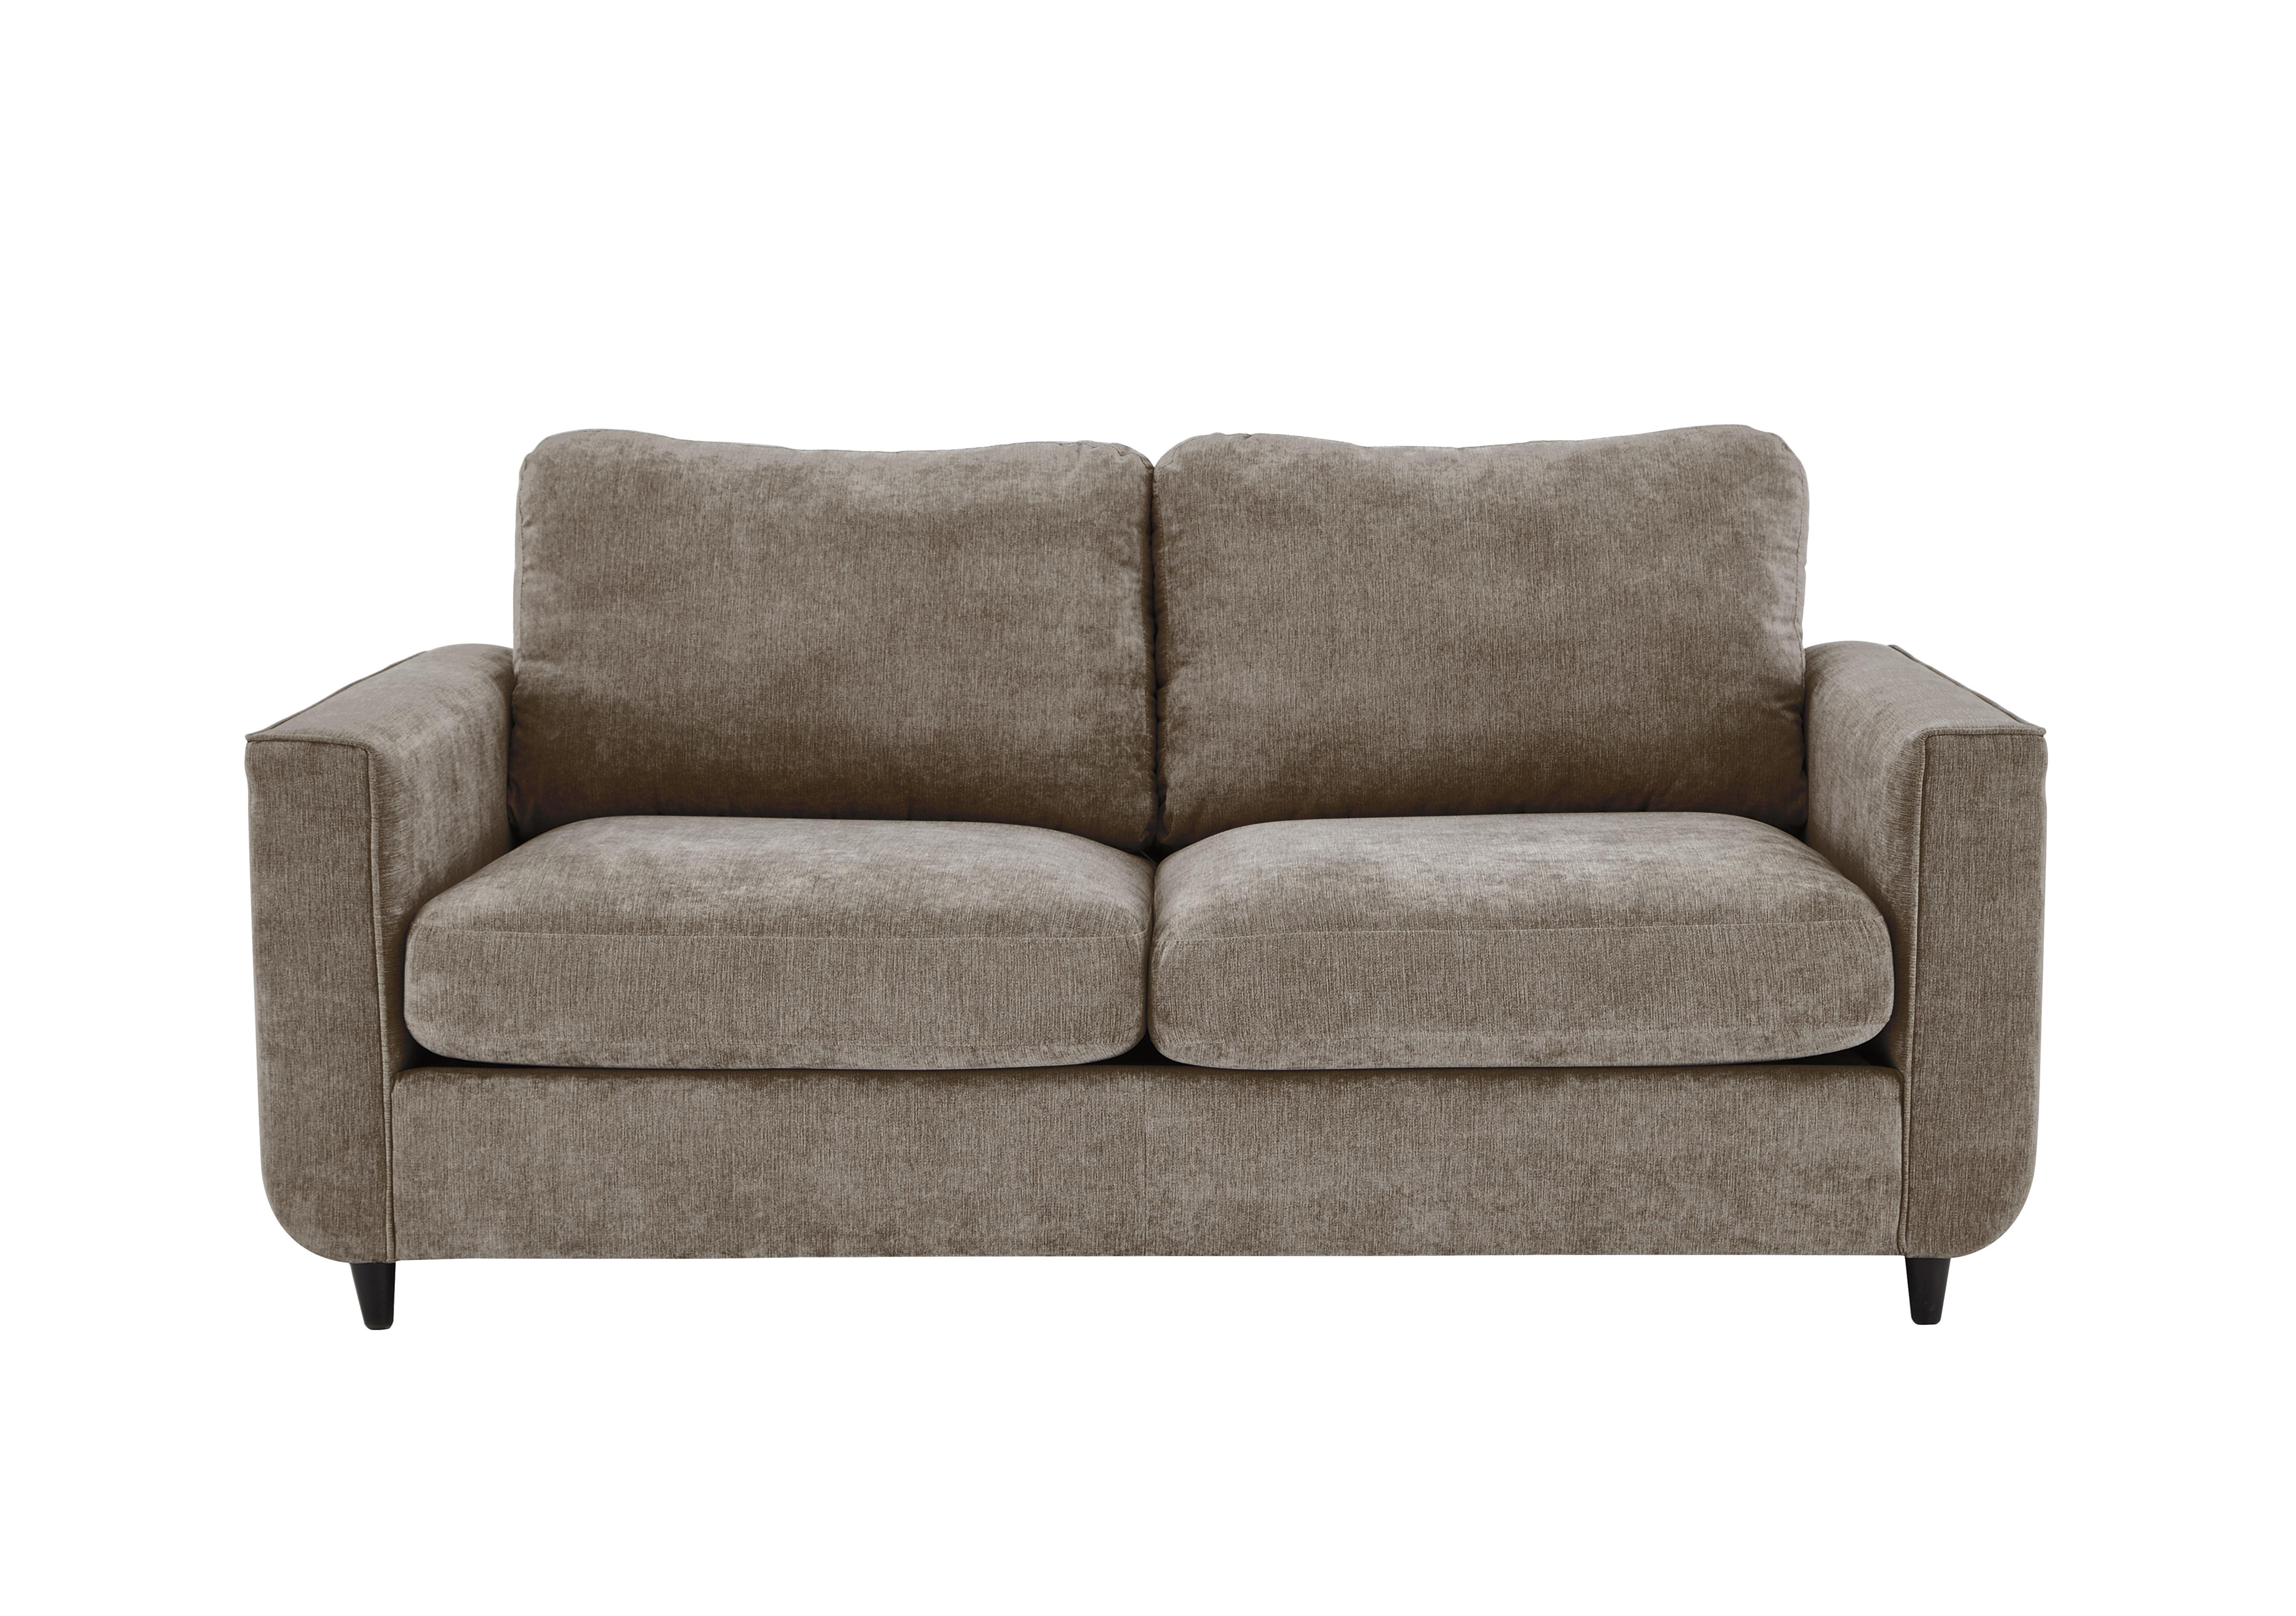 Esprit 3 Seater Fabric Sofa Bed in Taupe Ebony Feet on Furniture Village